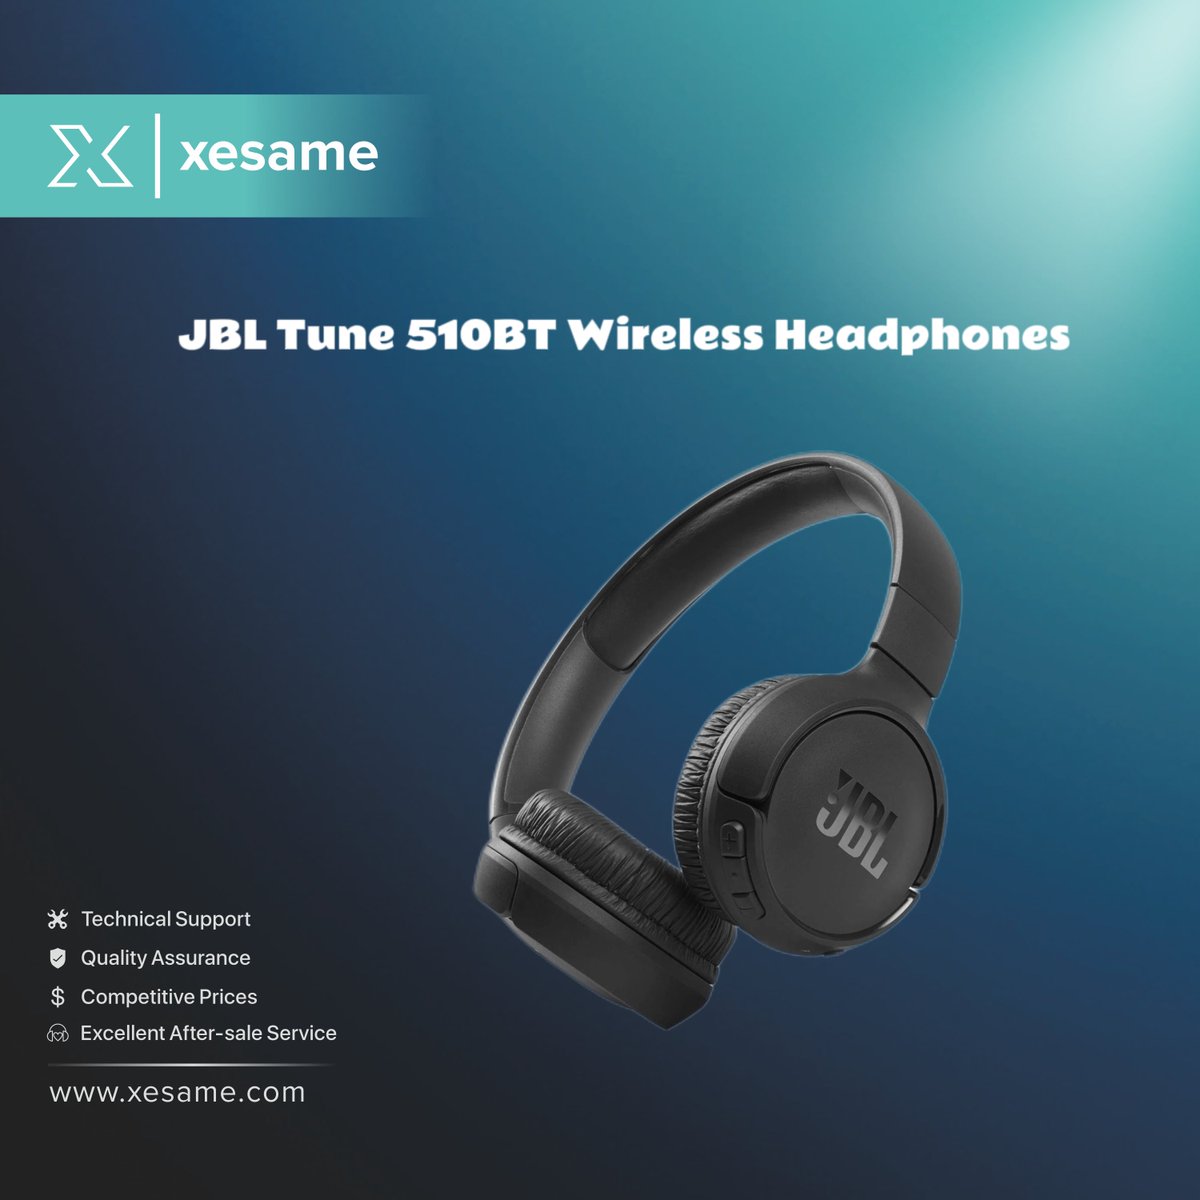 Hot-sale! JBL T510BT Pure Bass Wireless Headset 🎧

Blue/White/Black Colors Available
Limited stocks with promotional price now!!!

Email: info@xesame.com
Website: xesame.com

#JBL #headphones #Headset #headsettws #wirelessheadset #bluetoothheadset #WTS